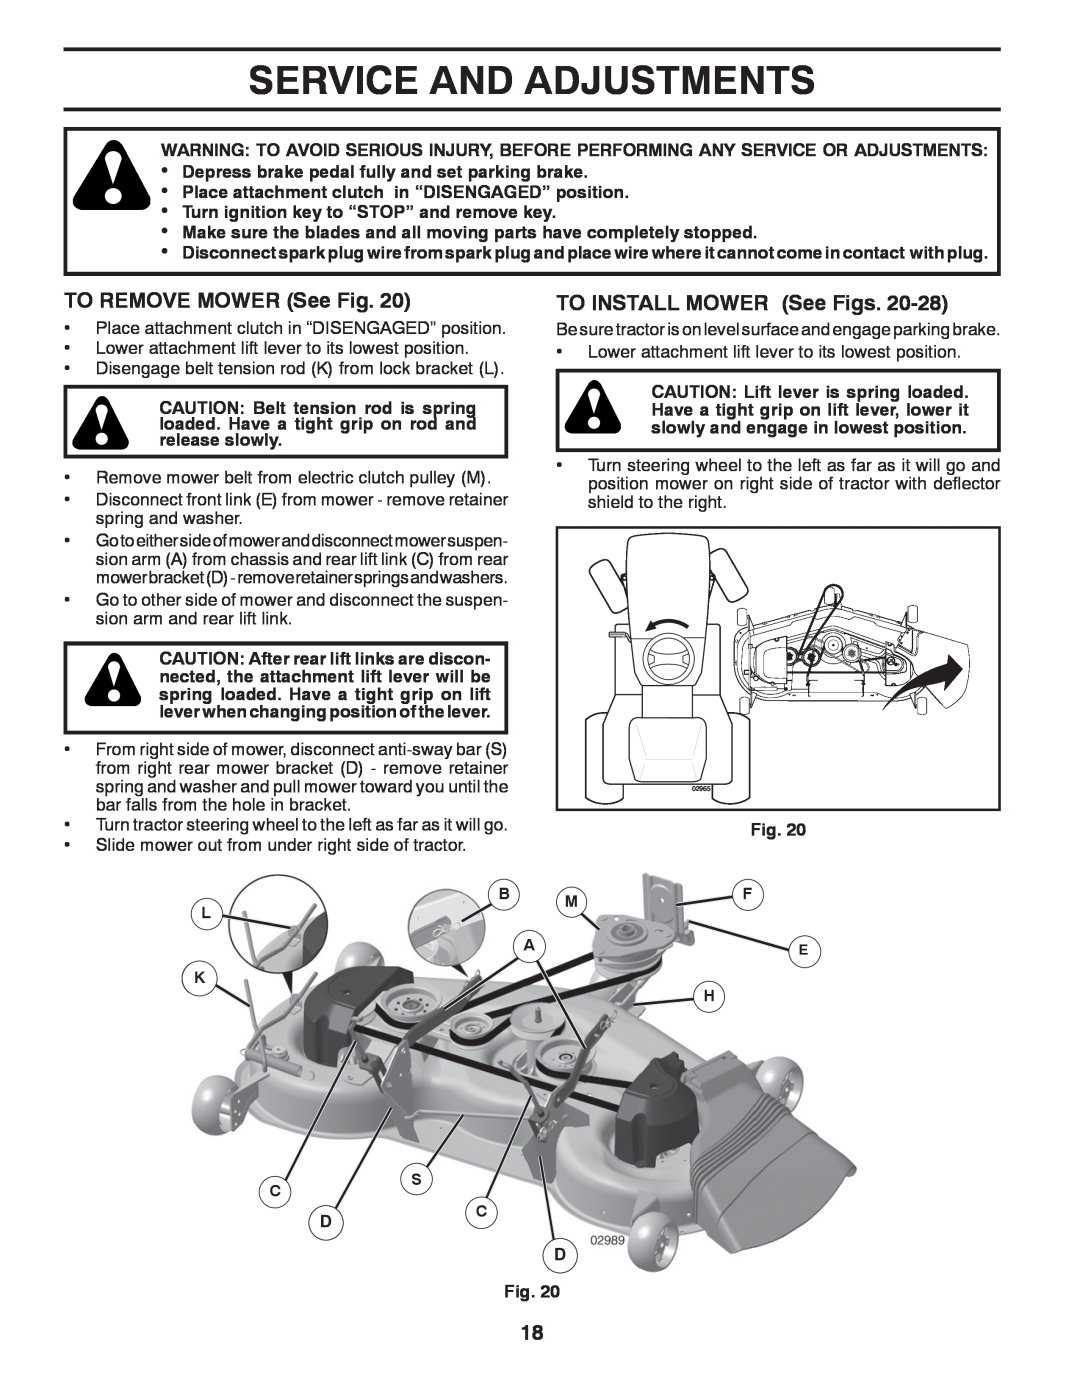 Poulan 96042010900, PB23H48YT, 433413 manual Service And Adjustments, TO REMOVE MOWER See Fig, TO INSTALL MOWER See Figs 